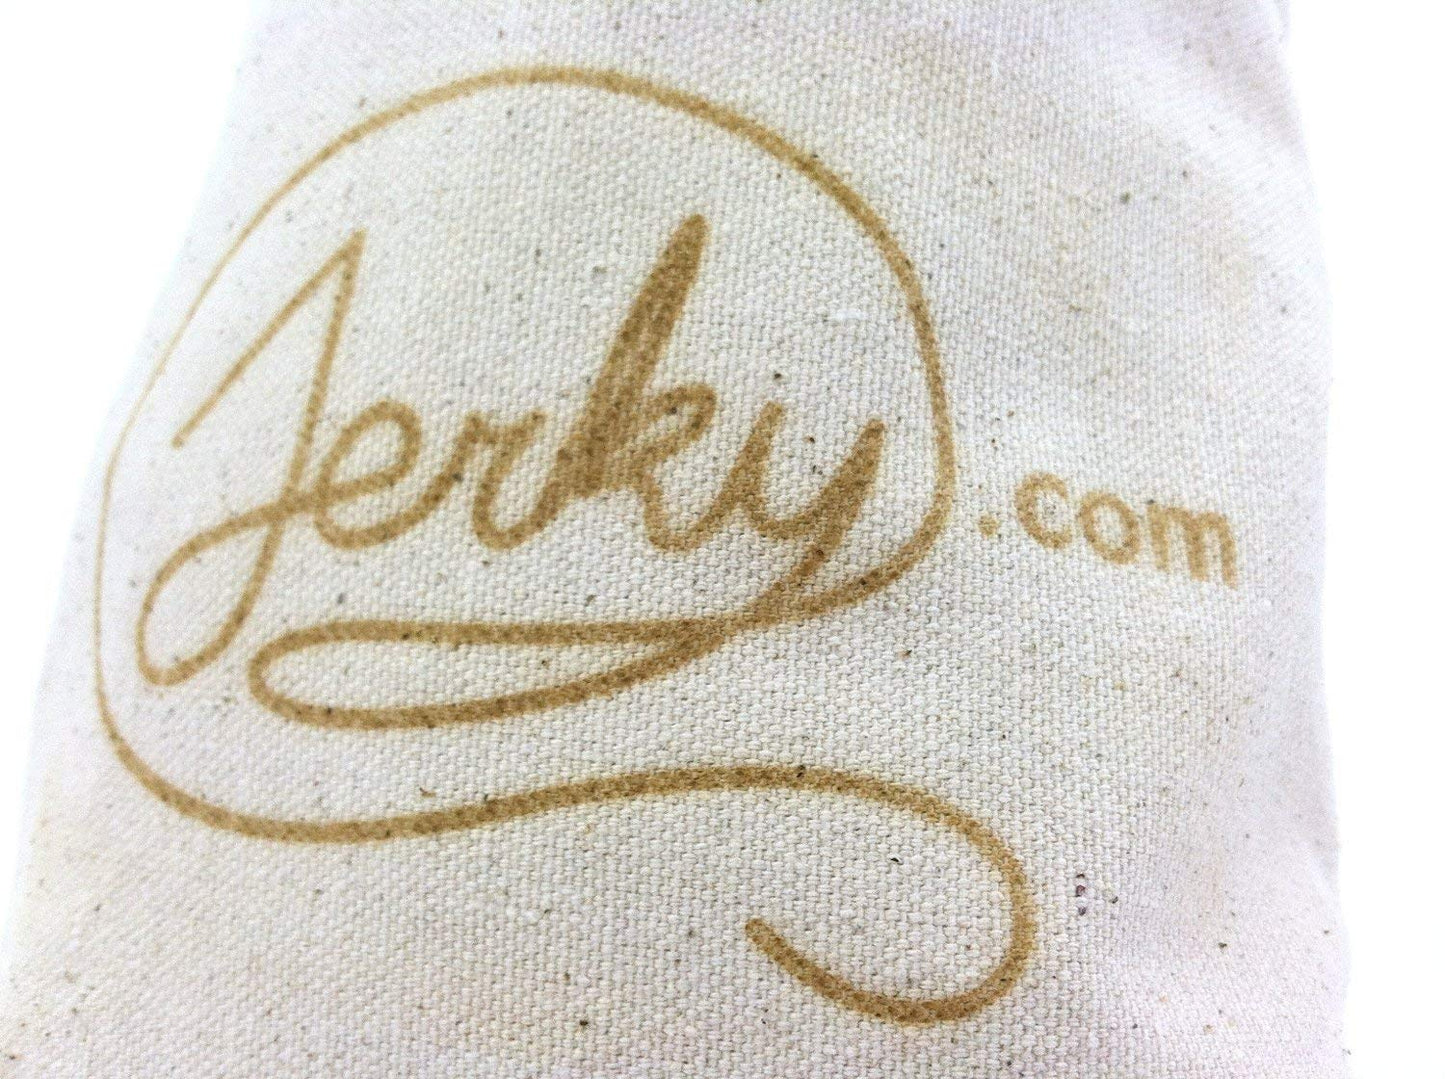 26-Piece Extra Mile Gift Bag by Jerky.com